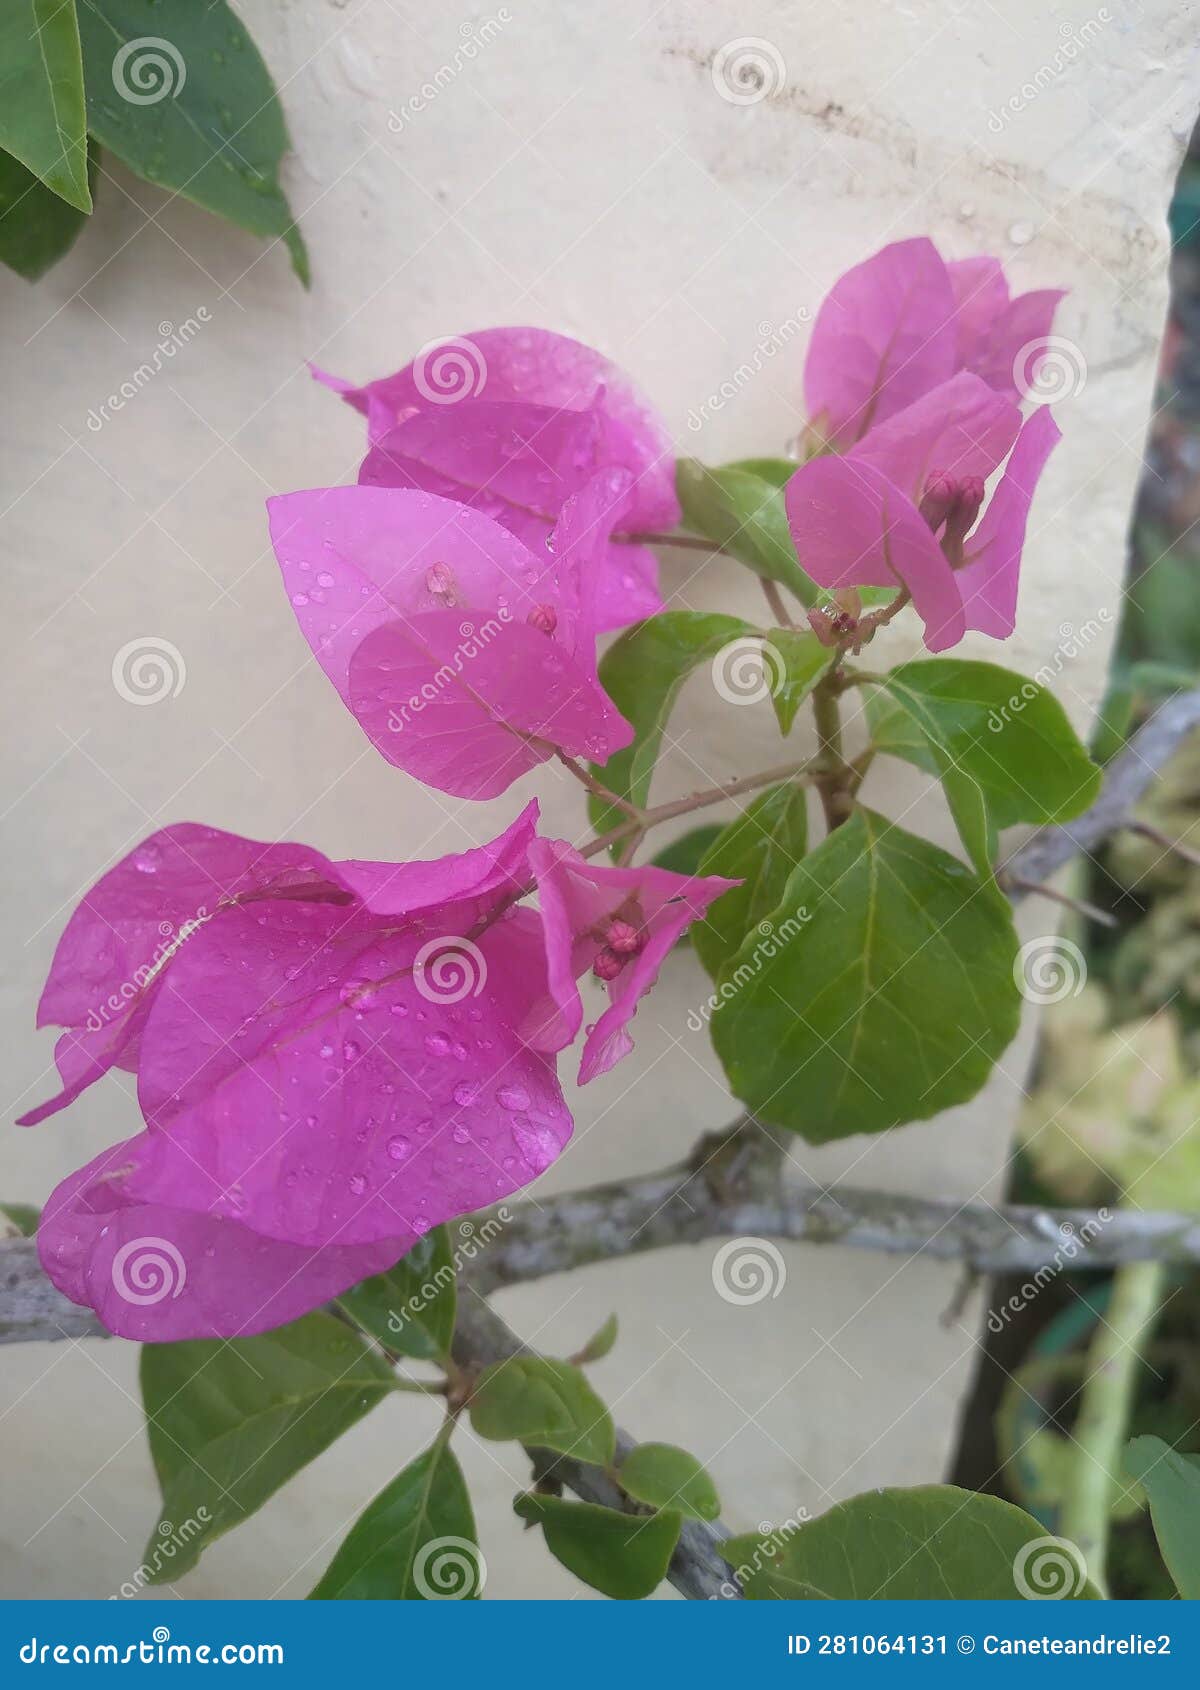 bougainvilla flowers blooms and survive inspite of el niÃ±o